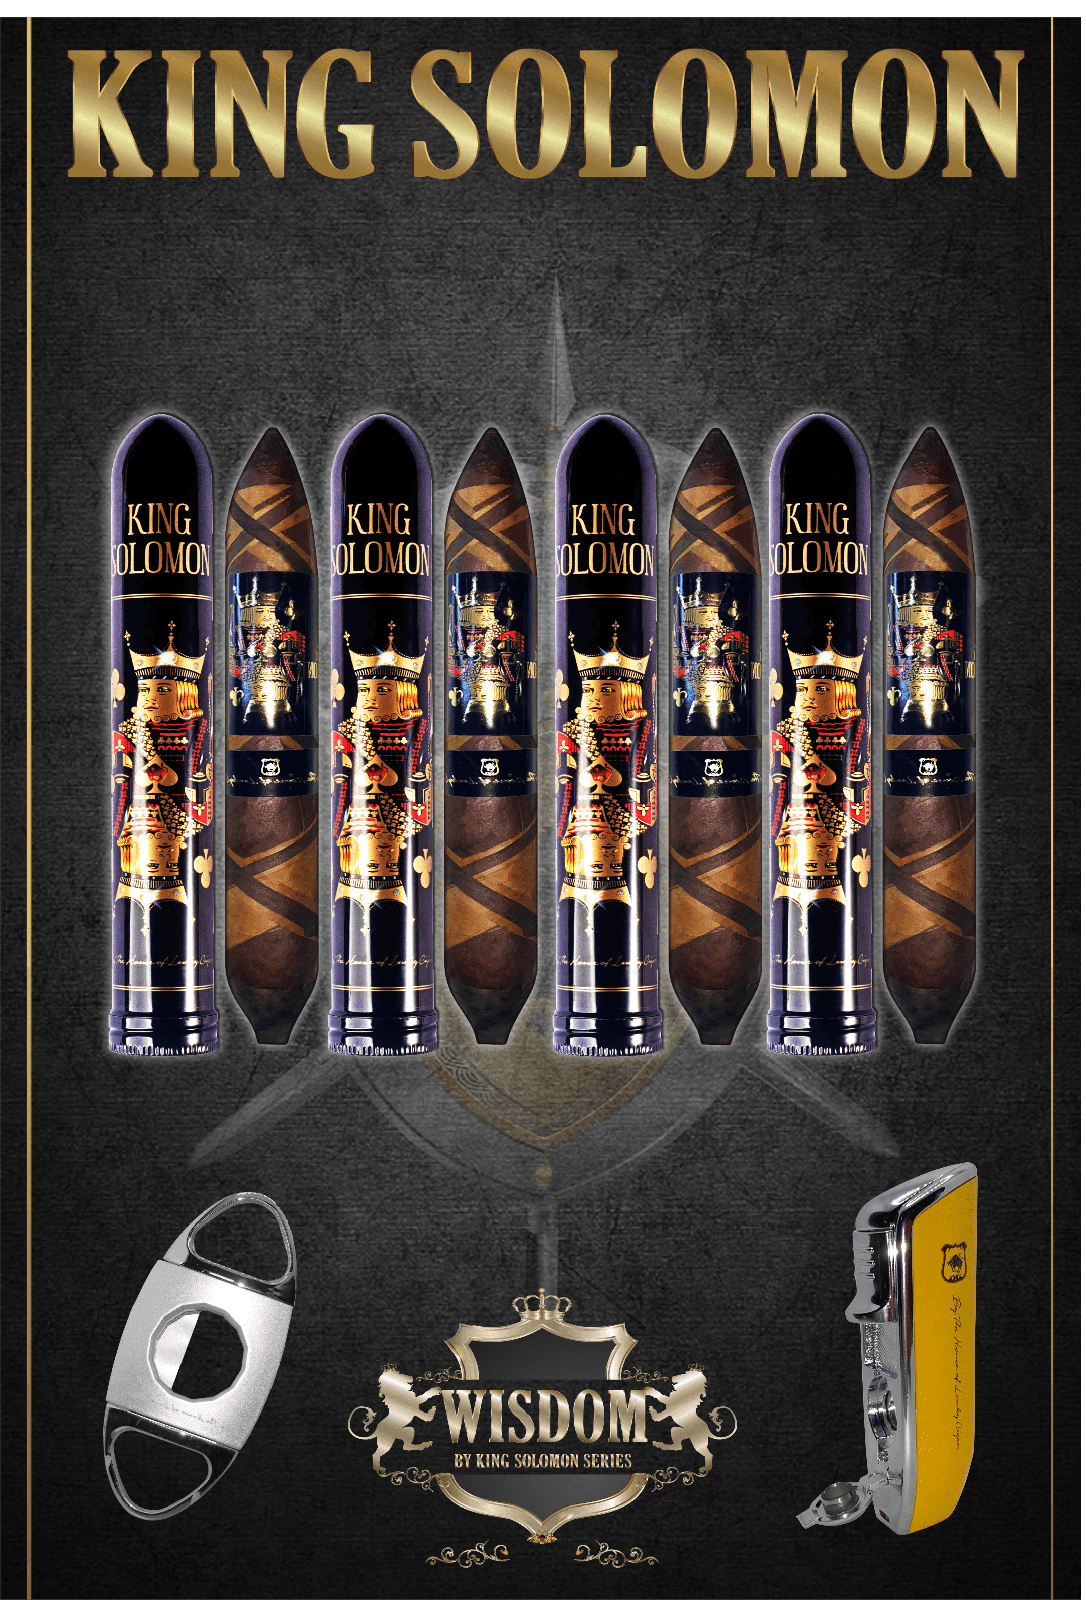 From The King Solomon Series: 4 Solomon 7x60 Cigars with Torch, Cutter Set